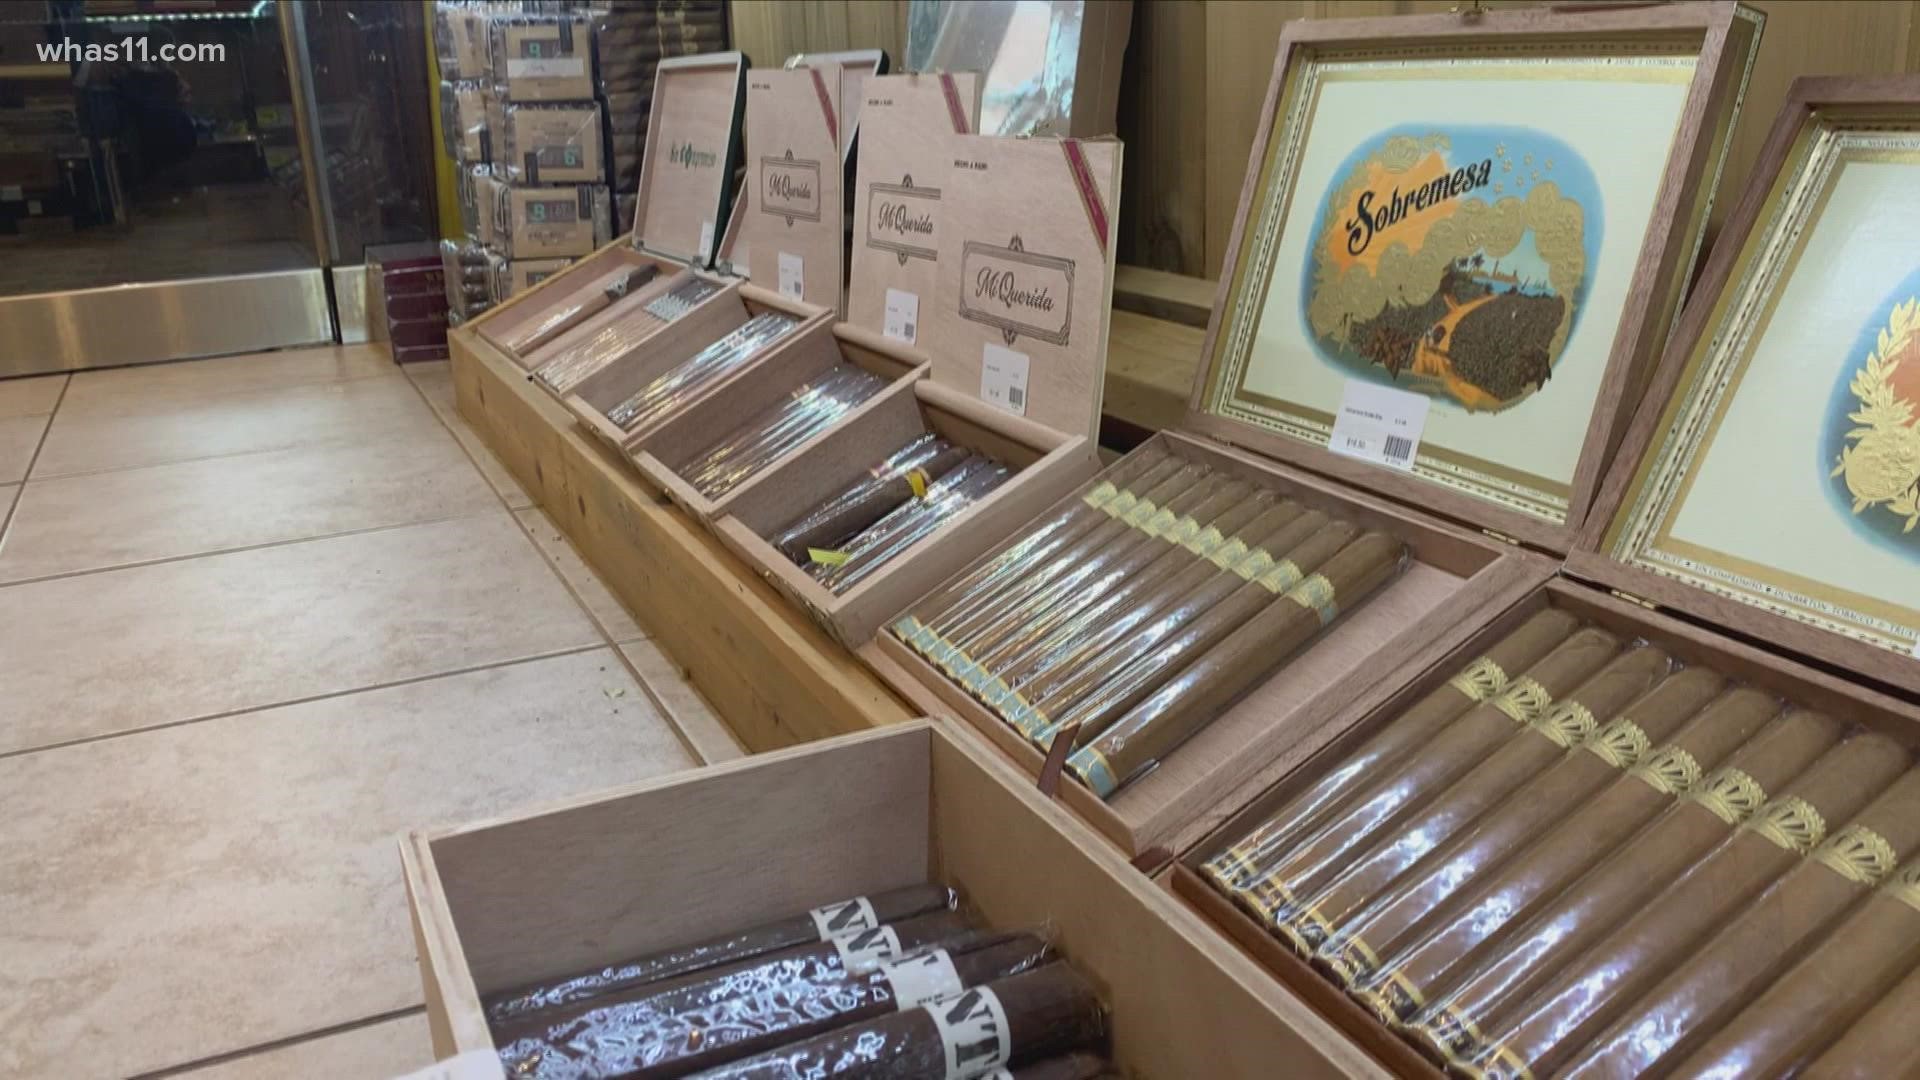 The ordinance would define a cigar bar as a business that generates at least 51% of its revenue from cigars and cigar-related products.